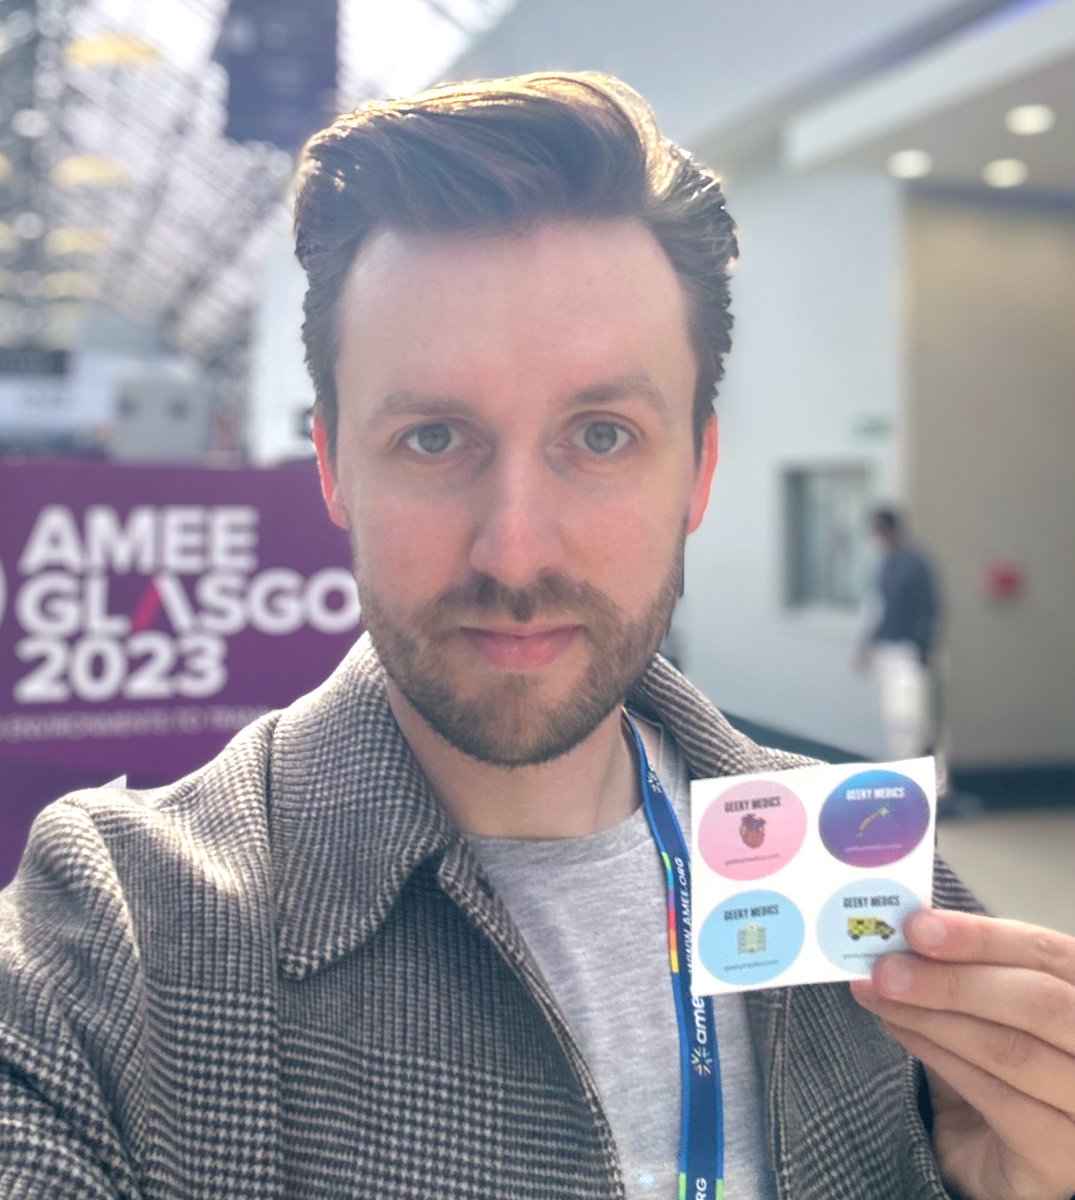 Back here at #AMEE2023 for round two. Make sure to come say hello if you want to nerd out about technology enhanced learning and score some @geekymedics stickers 👾👀 @AMEE_community